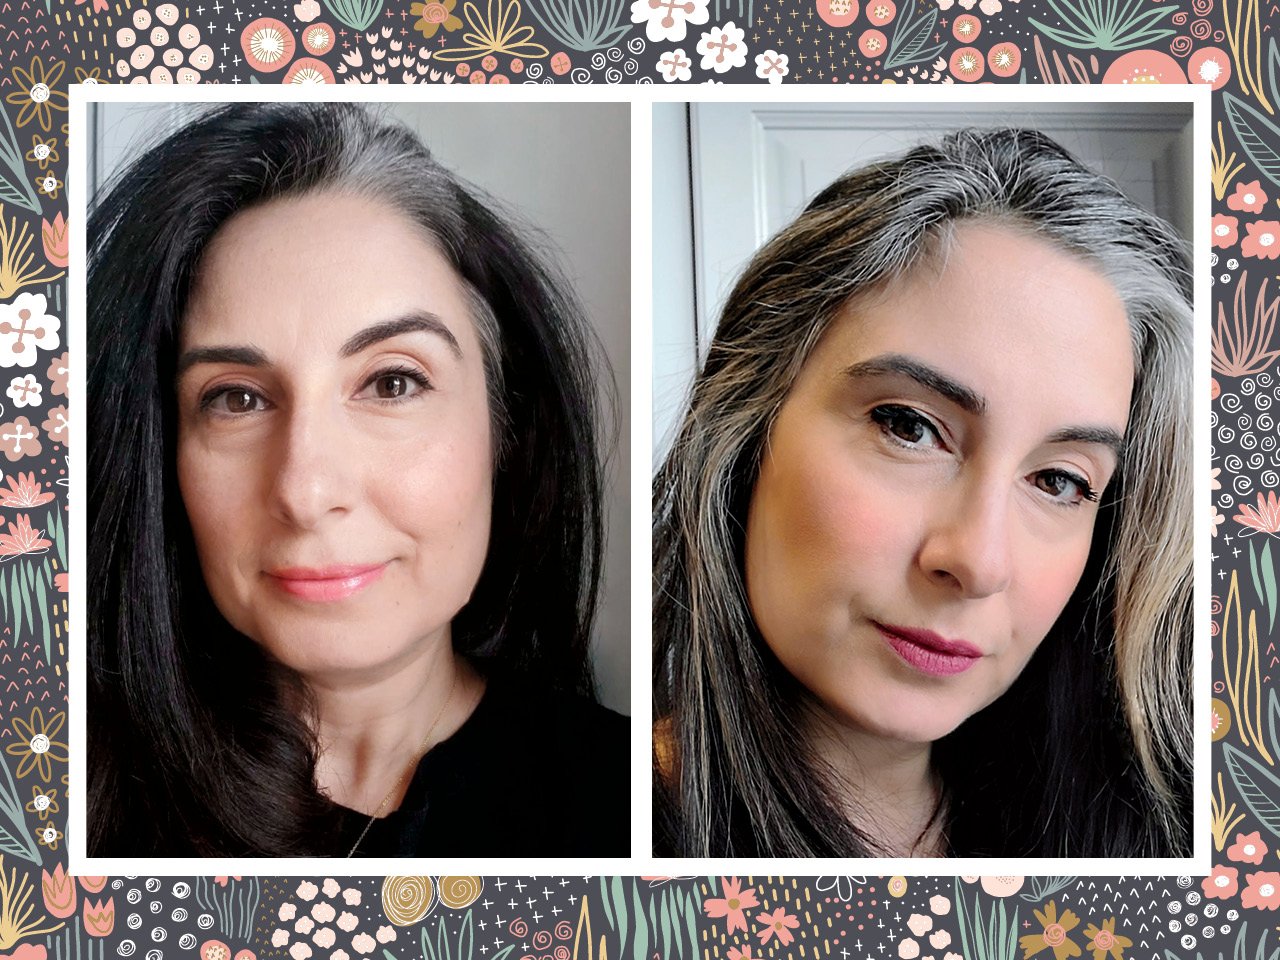 Growing Out My Grey Hair At 42: Here's What The Process Looked Like